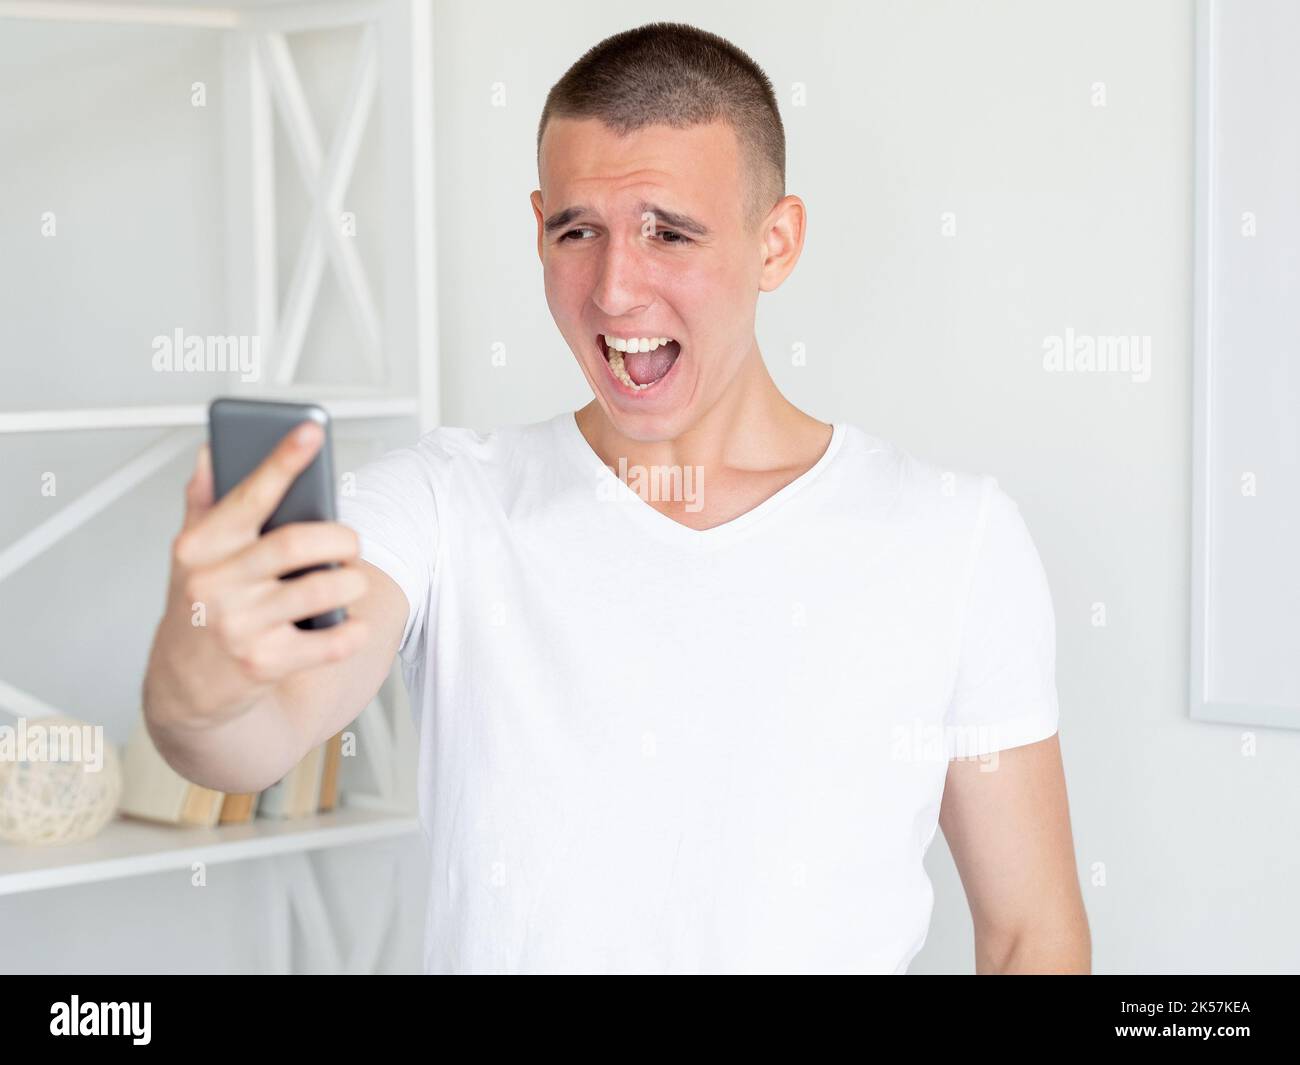 screaming man virtual connection angry emotion Stock Photo